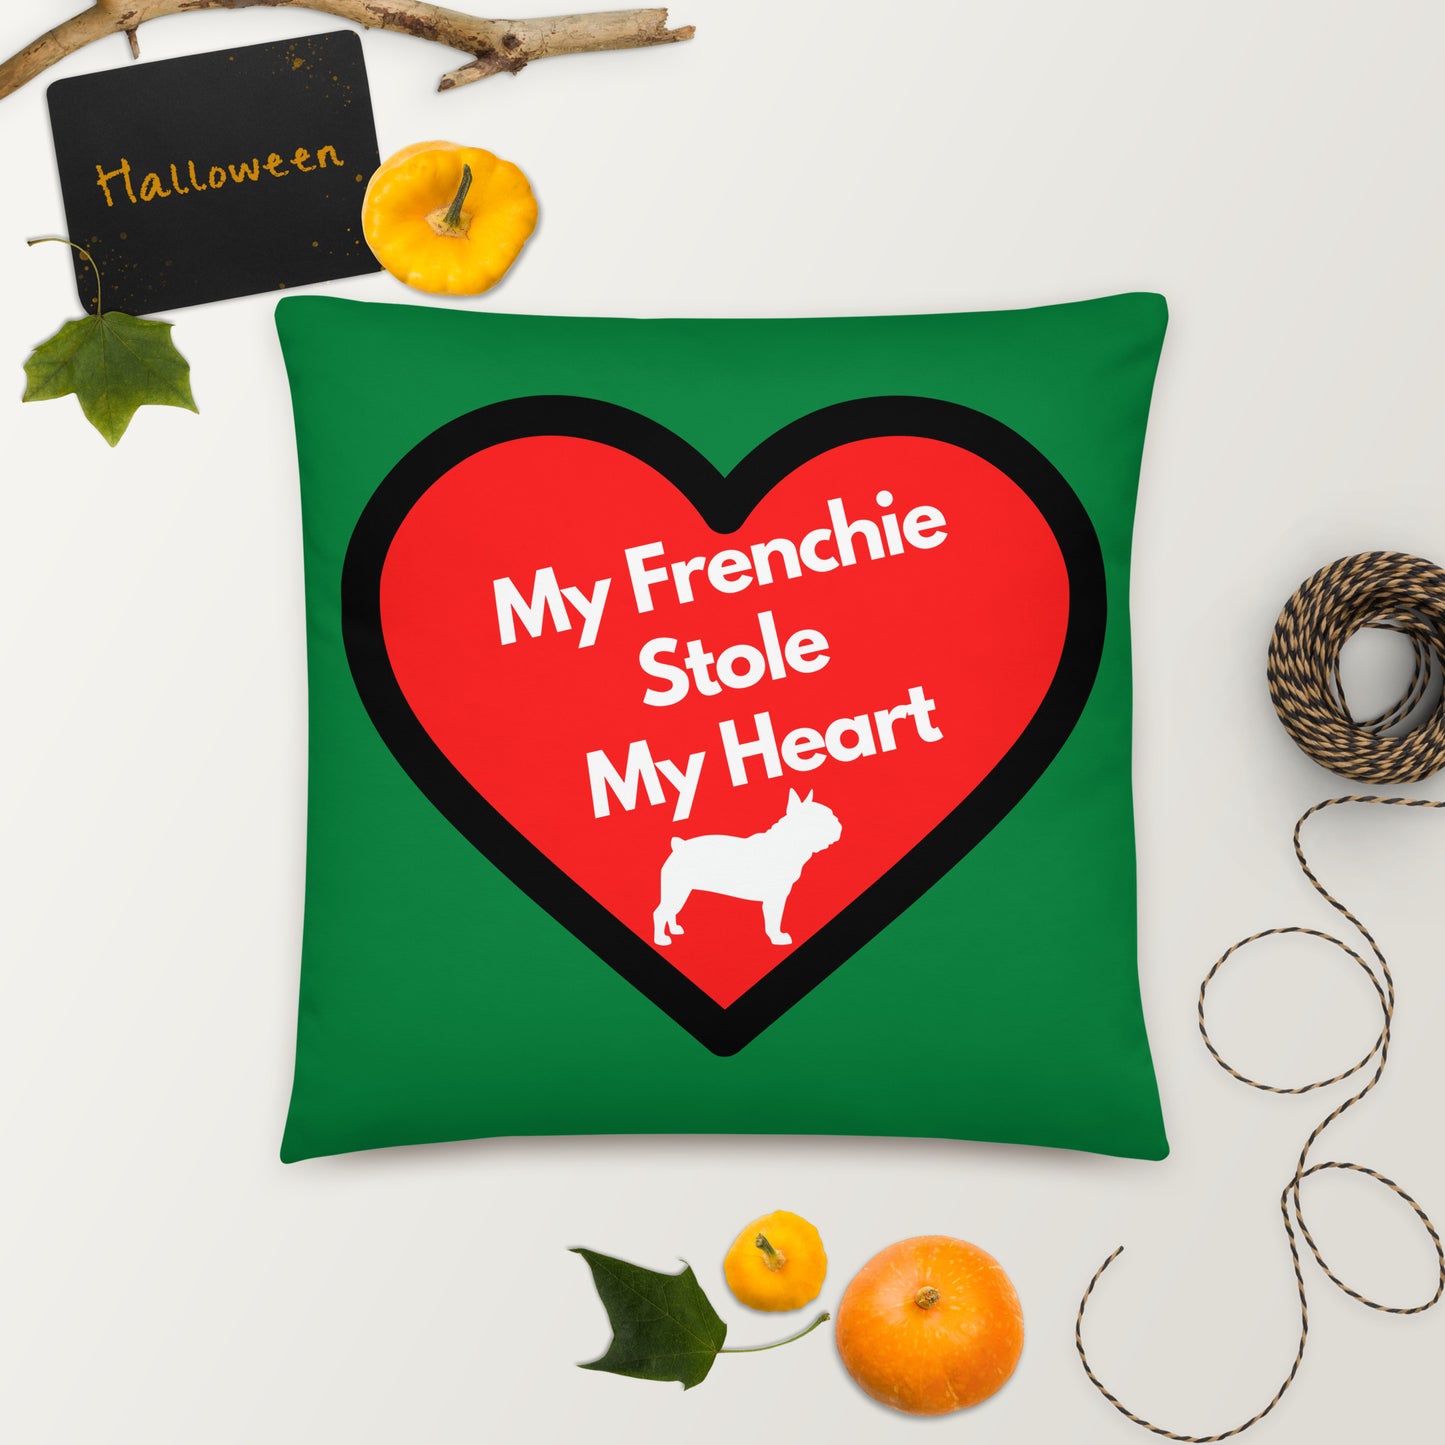 I Love Frenchie Pillow For Frenchie Bull Dog Dog Lovers